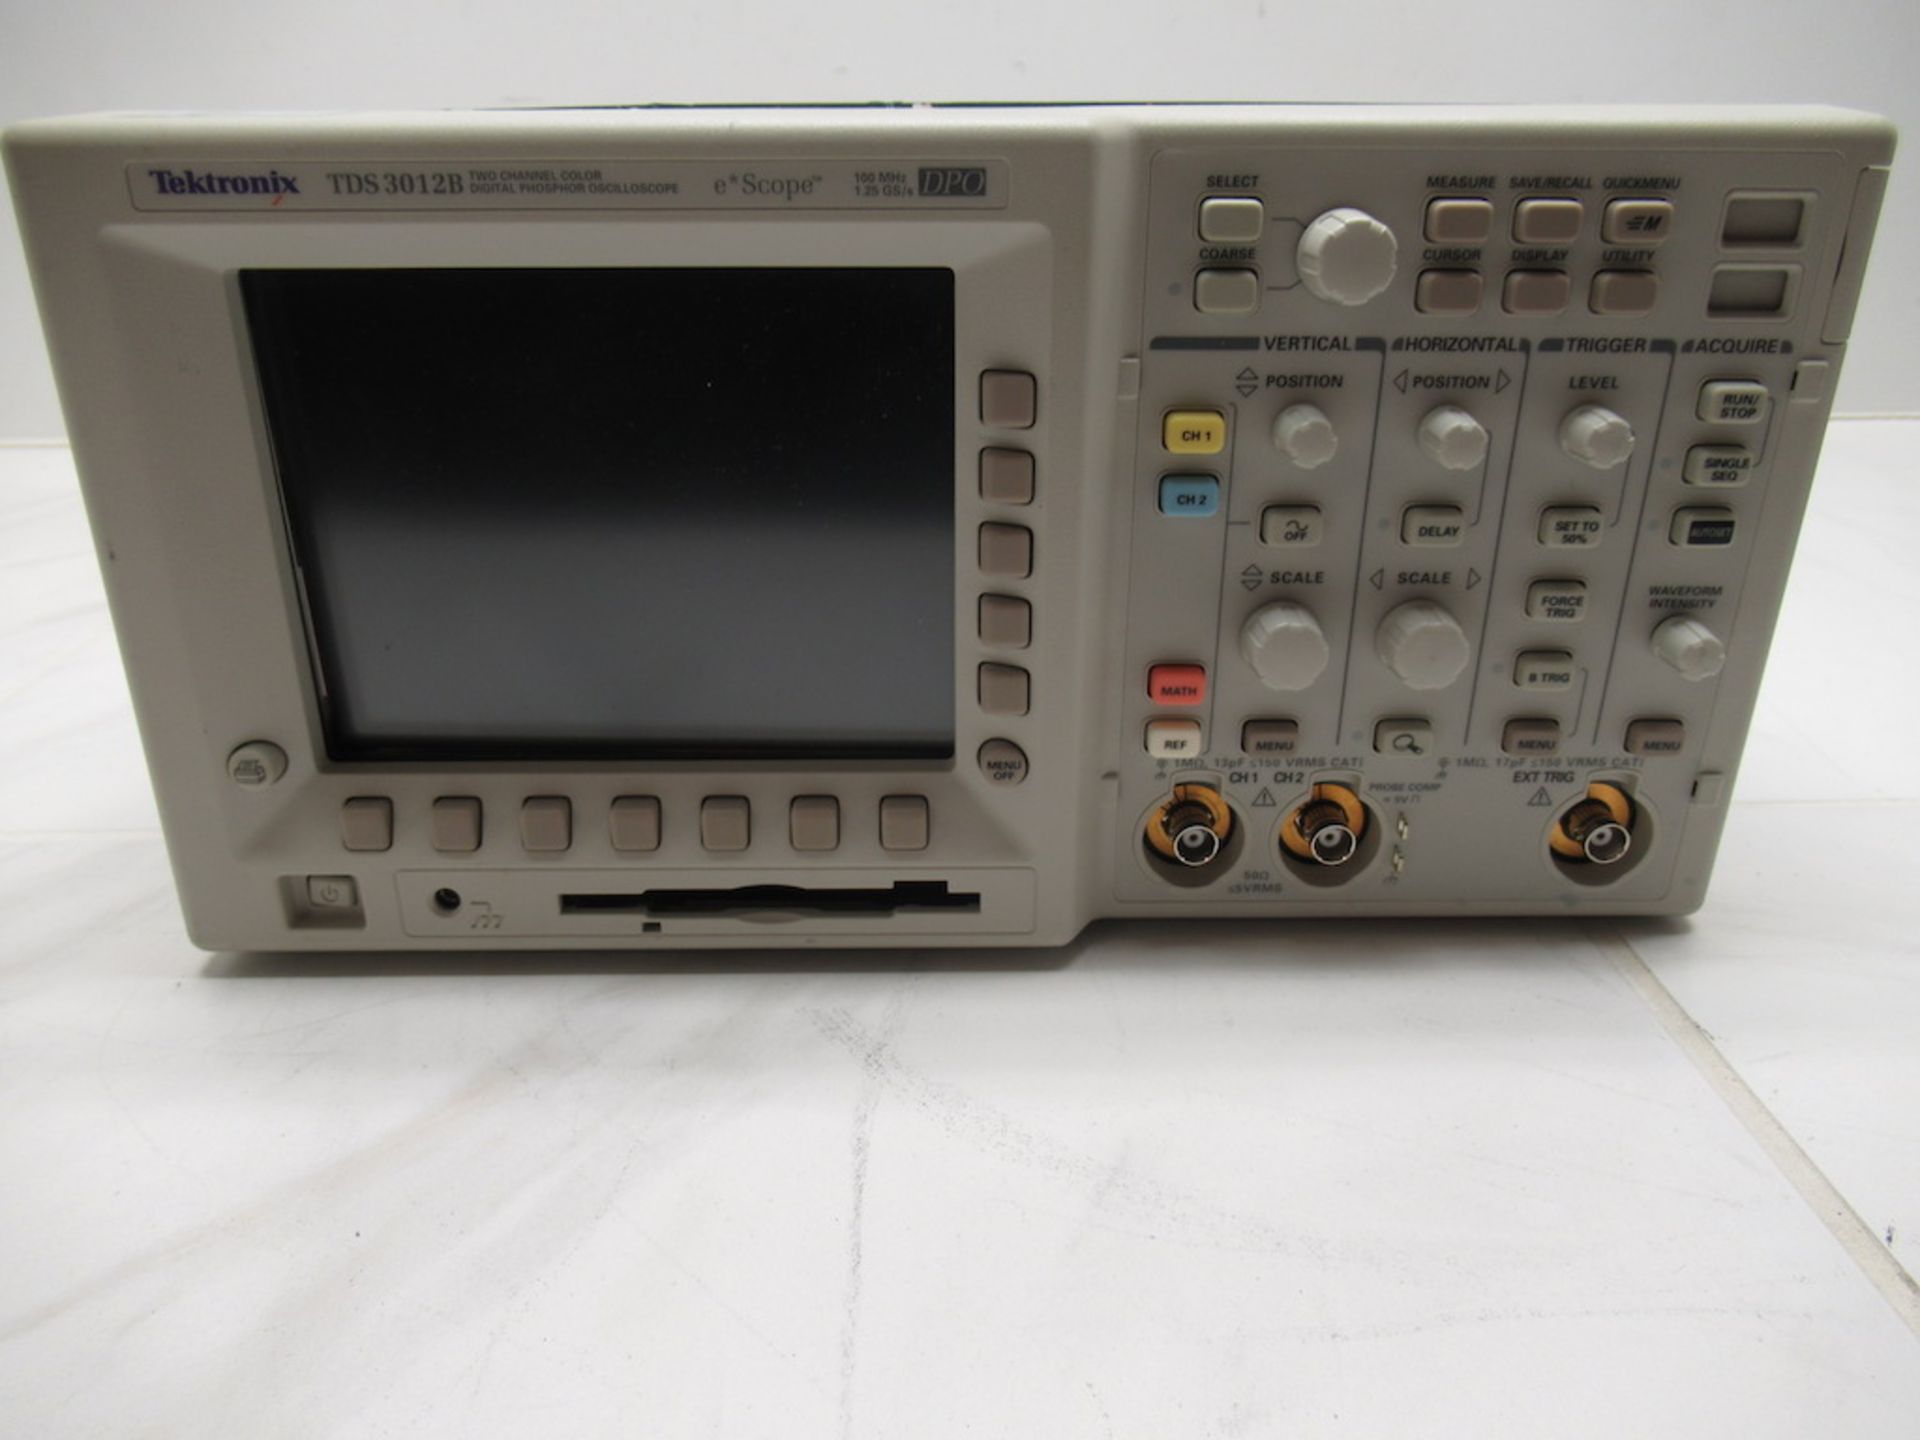 (1) Tektronix TDS 3012B Two Channel Color Digital Phosphor Oscilloscope, Comes with Manuel, Powers - Image 2 of 9